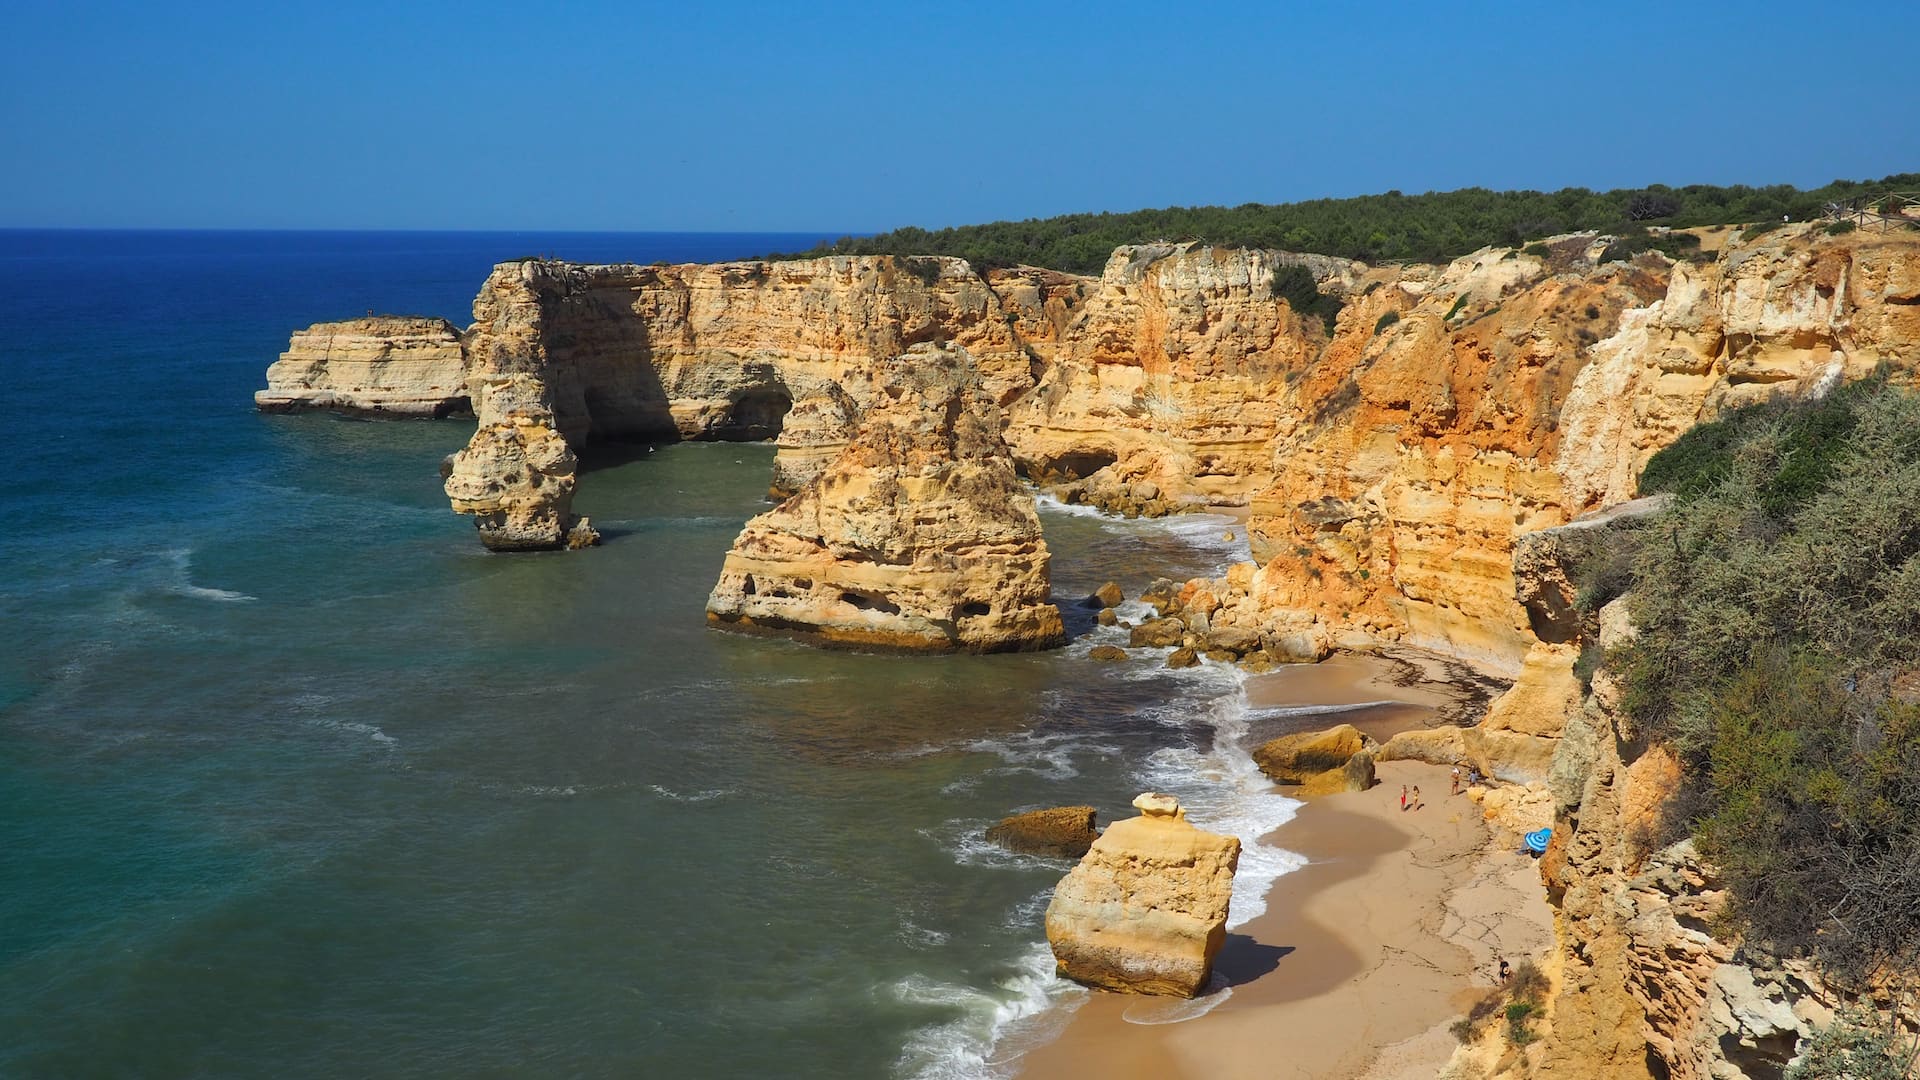 A golden sand beach surrounded by sandstone cliffs and large rocks just offshore